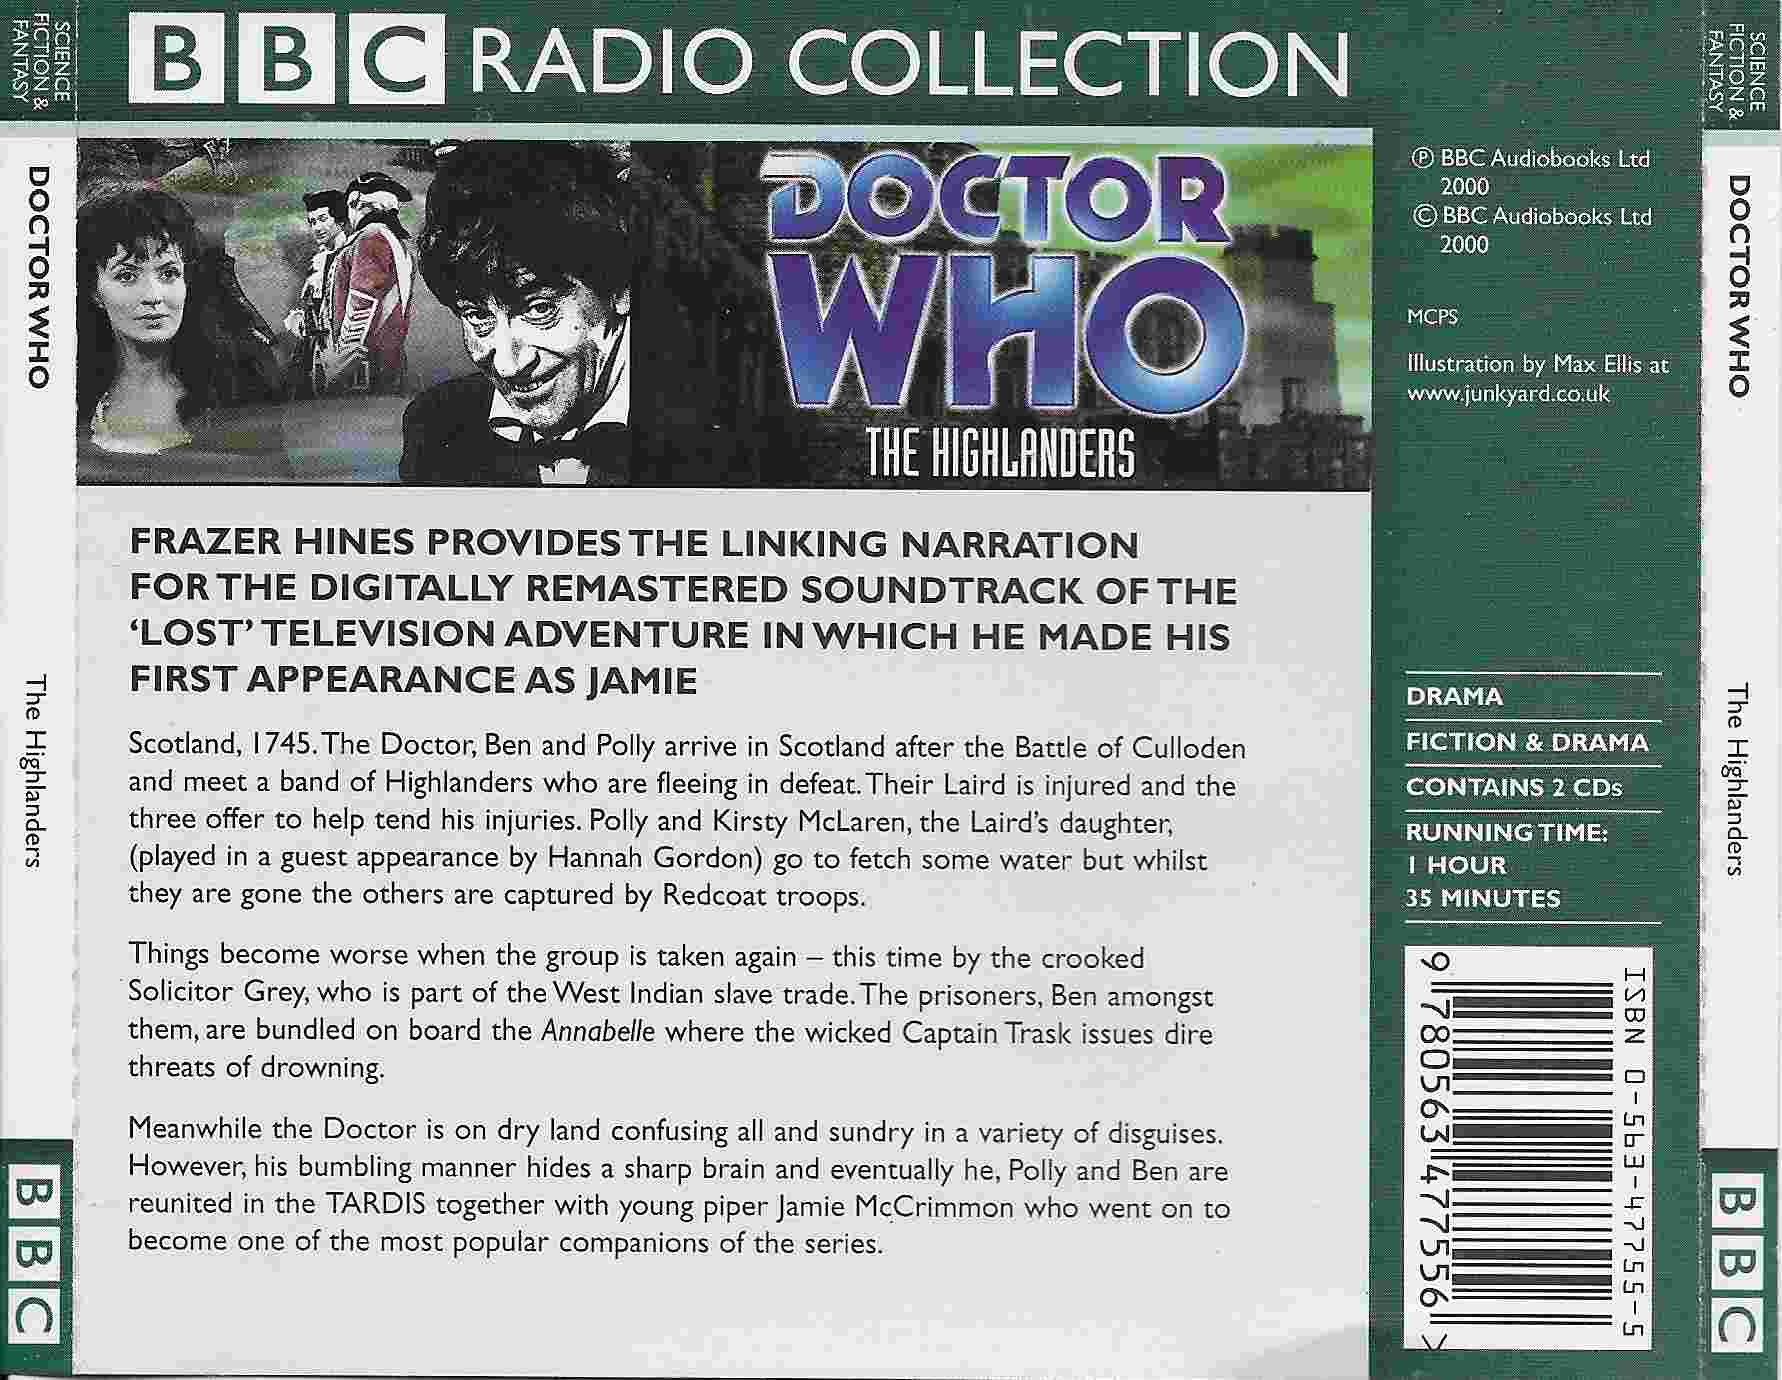 Picture of ISBN 0-563-47755-5 Doctor Who - The Highlanders by artist Gerry Davis from the BBC records and Tapes library